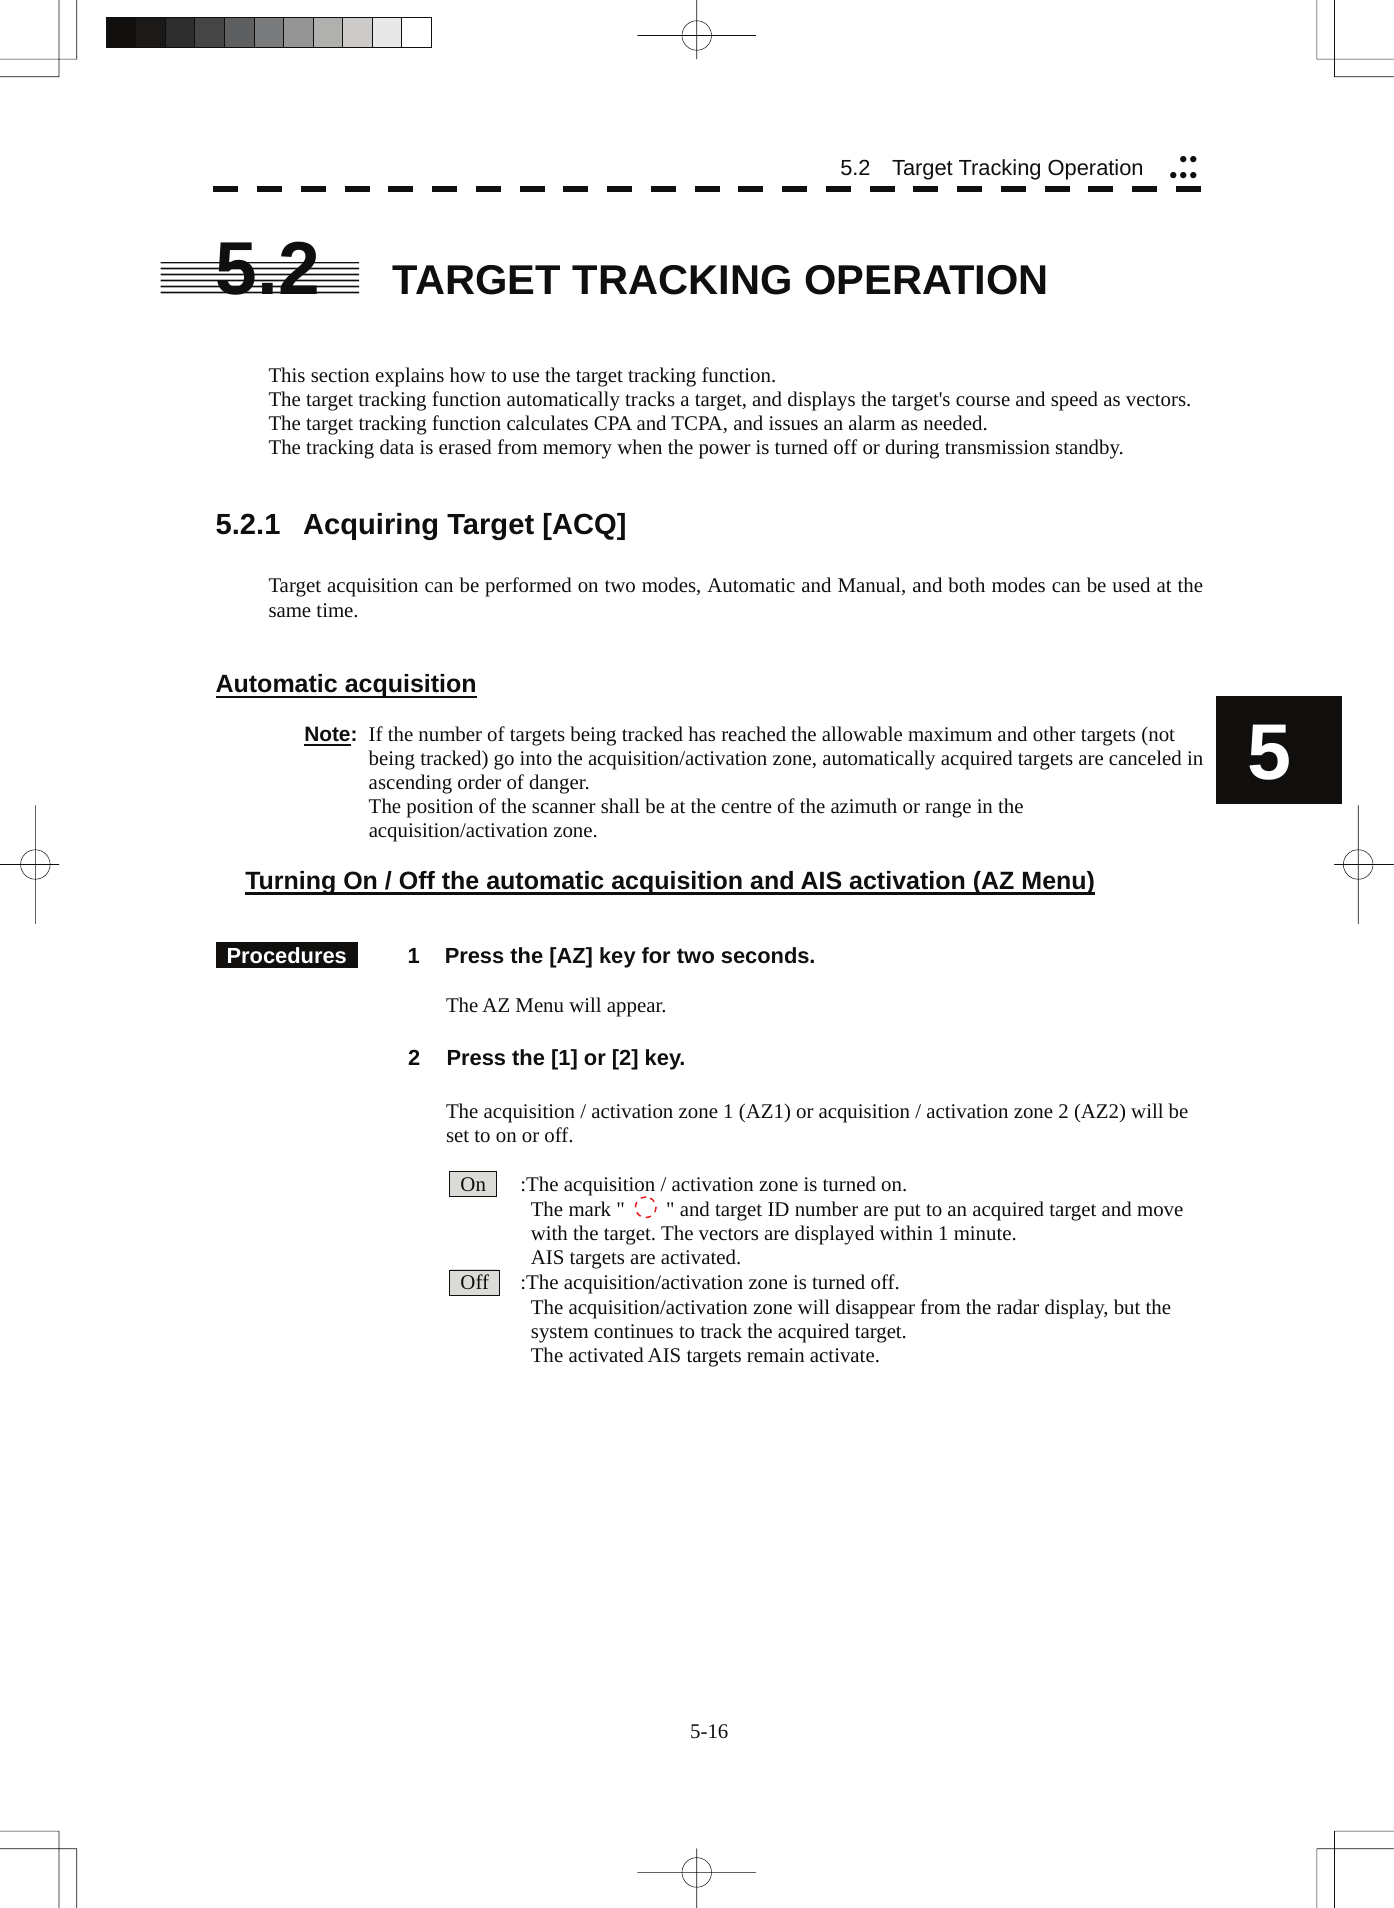  5.2   Target Tracking Operation yyyyy5.2  TARGET TRACKING OPERATION   This section explains how to use the target tracking function. The target tracking function automatically tracks a target, and displays the target&apos;s course and speed as vectors. The target tracking function calculates CPA and TCPA, and issues an alarm as needed. The tracking data is erased from memory when the power is turned off or during transmission standby.   5.2.1  Acquiring Target [ACQ]  Target acquisition can be performed on two modes, Automatic and Manual, and both modes can be used at the same time.   Automatic acquisition  5Note:  If the number of targets being tracked has reached the allowable maximum and other targets (not being tracked) go into the acquisition/activation zone, automatically acquired targets are canceled in ascending order of danger.   The position of the scanner shall be at the centre of the azimuth or range in the acquisition/activation zone.  Turning On / Off the automatic acquisition and AIS activation (AZ Menu)    Procedures   1  Press the [AZ] key for two seconds.    The AZ Menu will appear.  2  Press the [1] or [2] key.    The acquisition / activation zone 1 (AZ1) or acquisition / activation zone 2 (AZ2) will be set to on or off.    On      :The acquisition / activation zone is turned on.   The mark &quot;    &quot; and target ID number are put to an acquired target and move   with the target. The vectors are displayed within 1 minute.   AIS targets are activated.   Off      :The acquisition/activation zone is turned off.   The acquisition/activation zone will disappear from the radar display, but the   system continues to track the acquired target.   The activated AIS targets remain activate.   5-16 